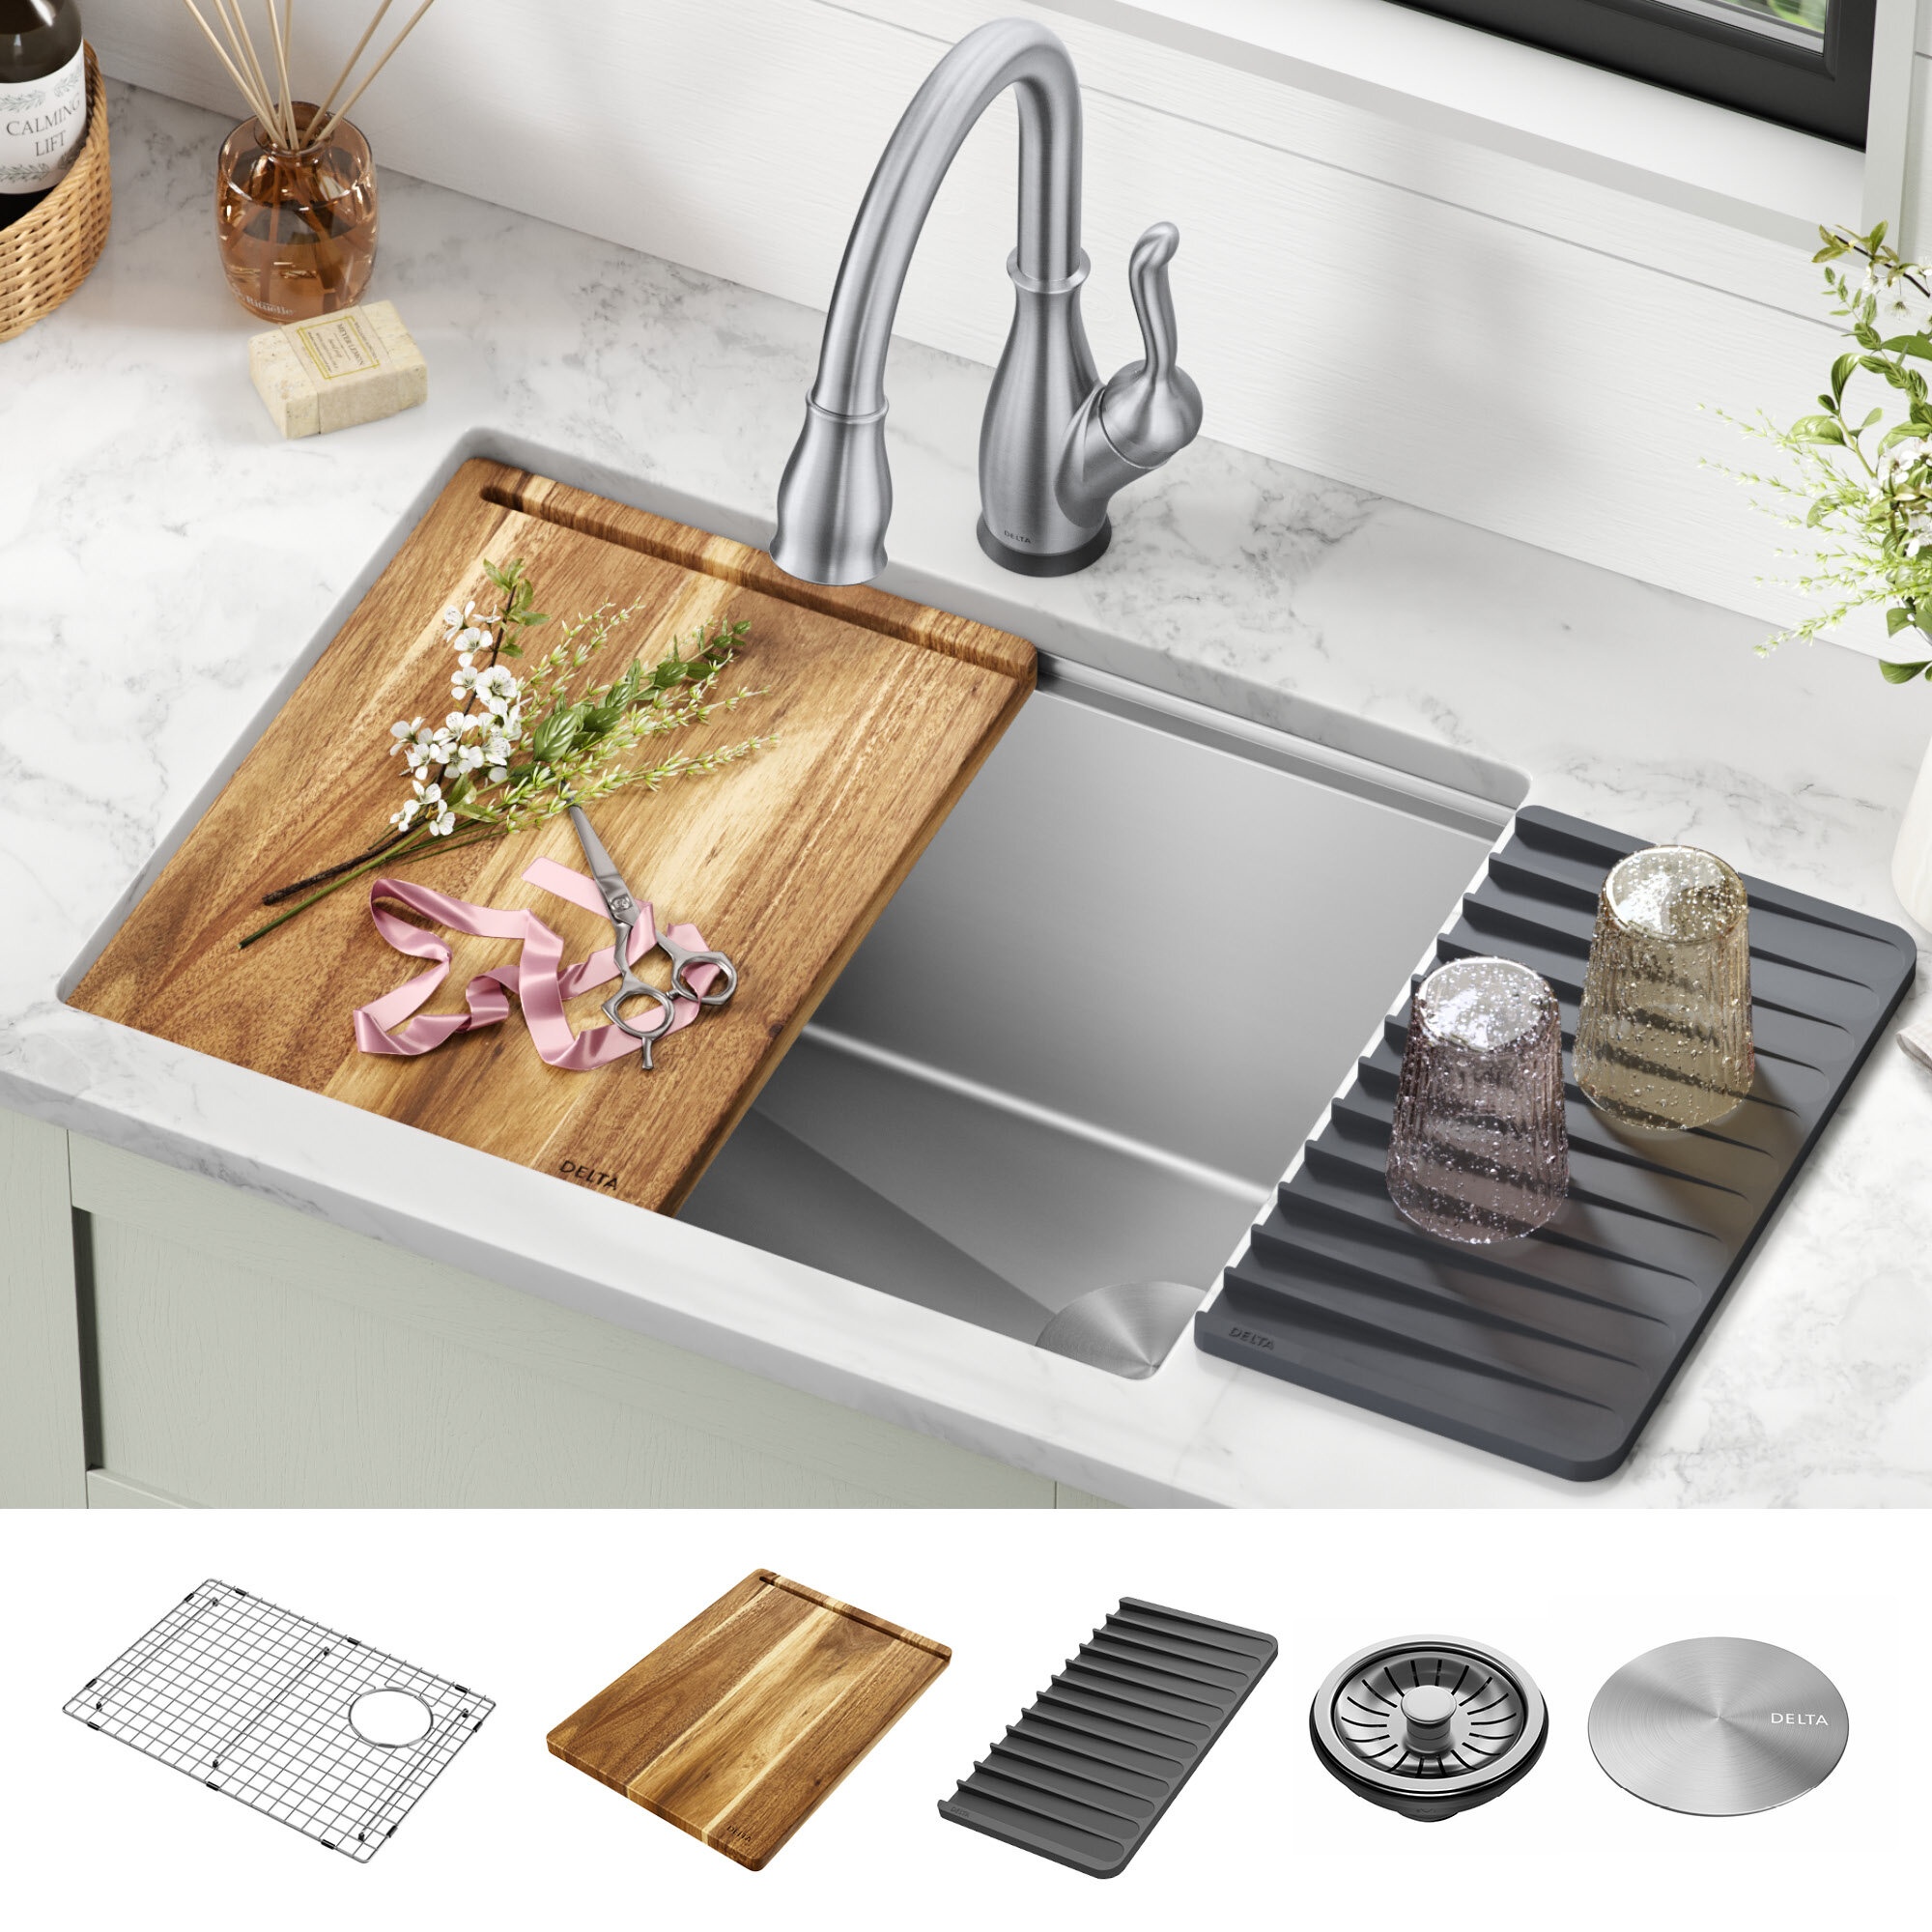 https://visualhunt.com/photos/23/delta-lorelai-19-w-single-bowl-stainless-steel-farmhouse-kitchen-sink-with-1-faucet-hole.jpg